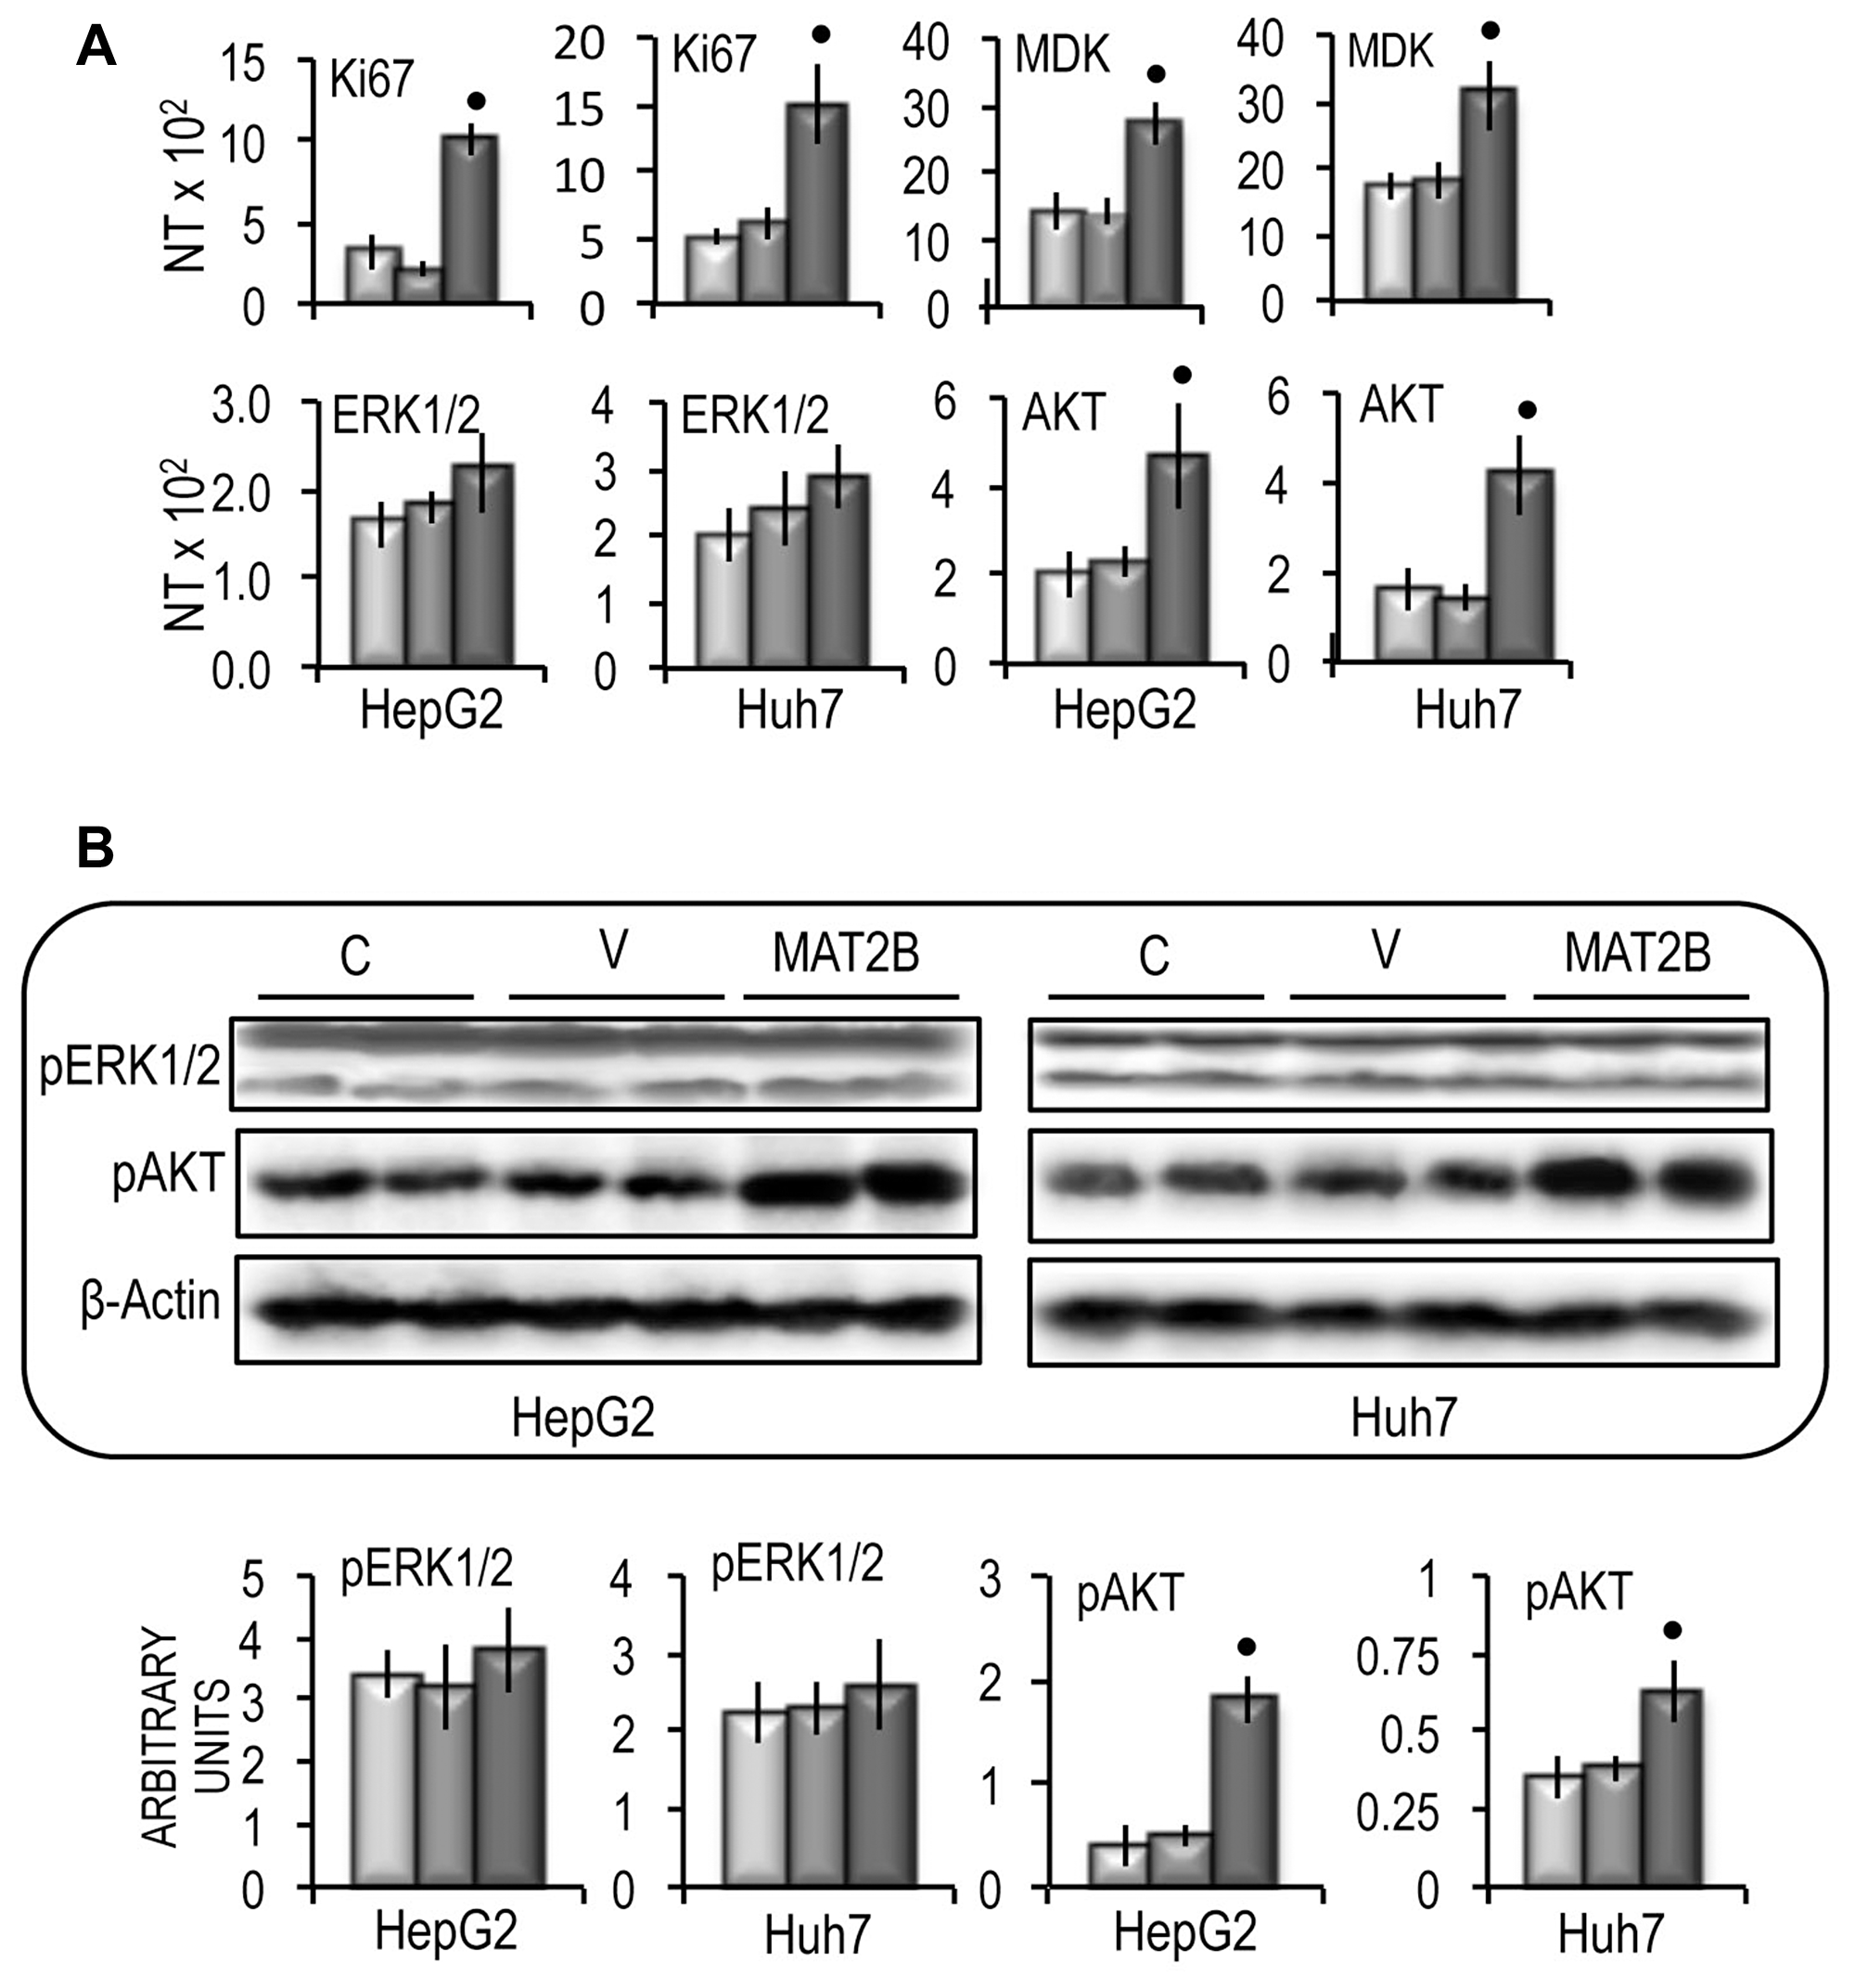 Effect of MAT2B forced expression on Ki67, MDK, ERK1/2 and AKT expression in HepG2 and Huh7 cells.